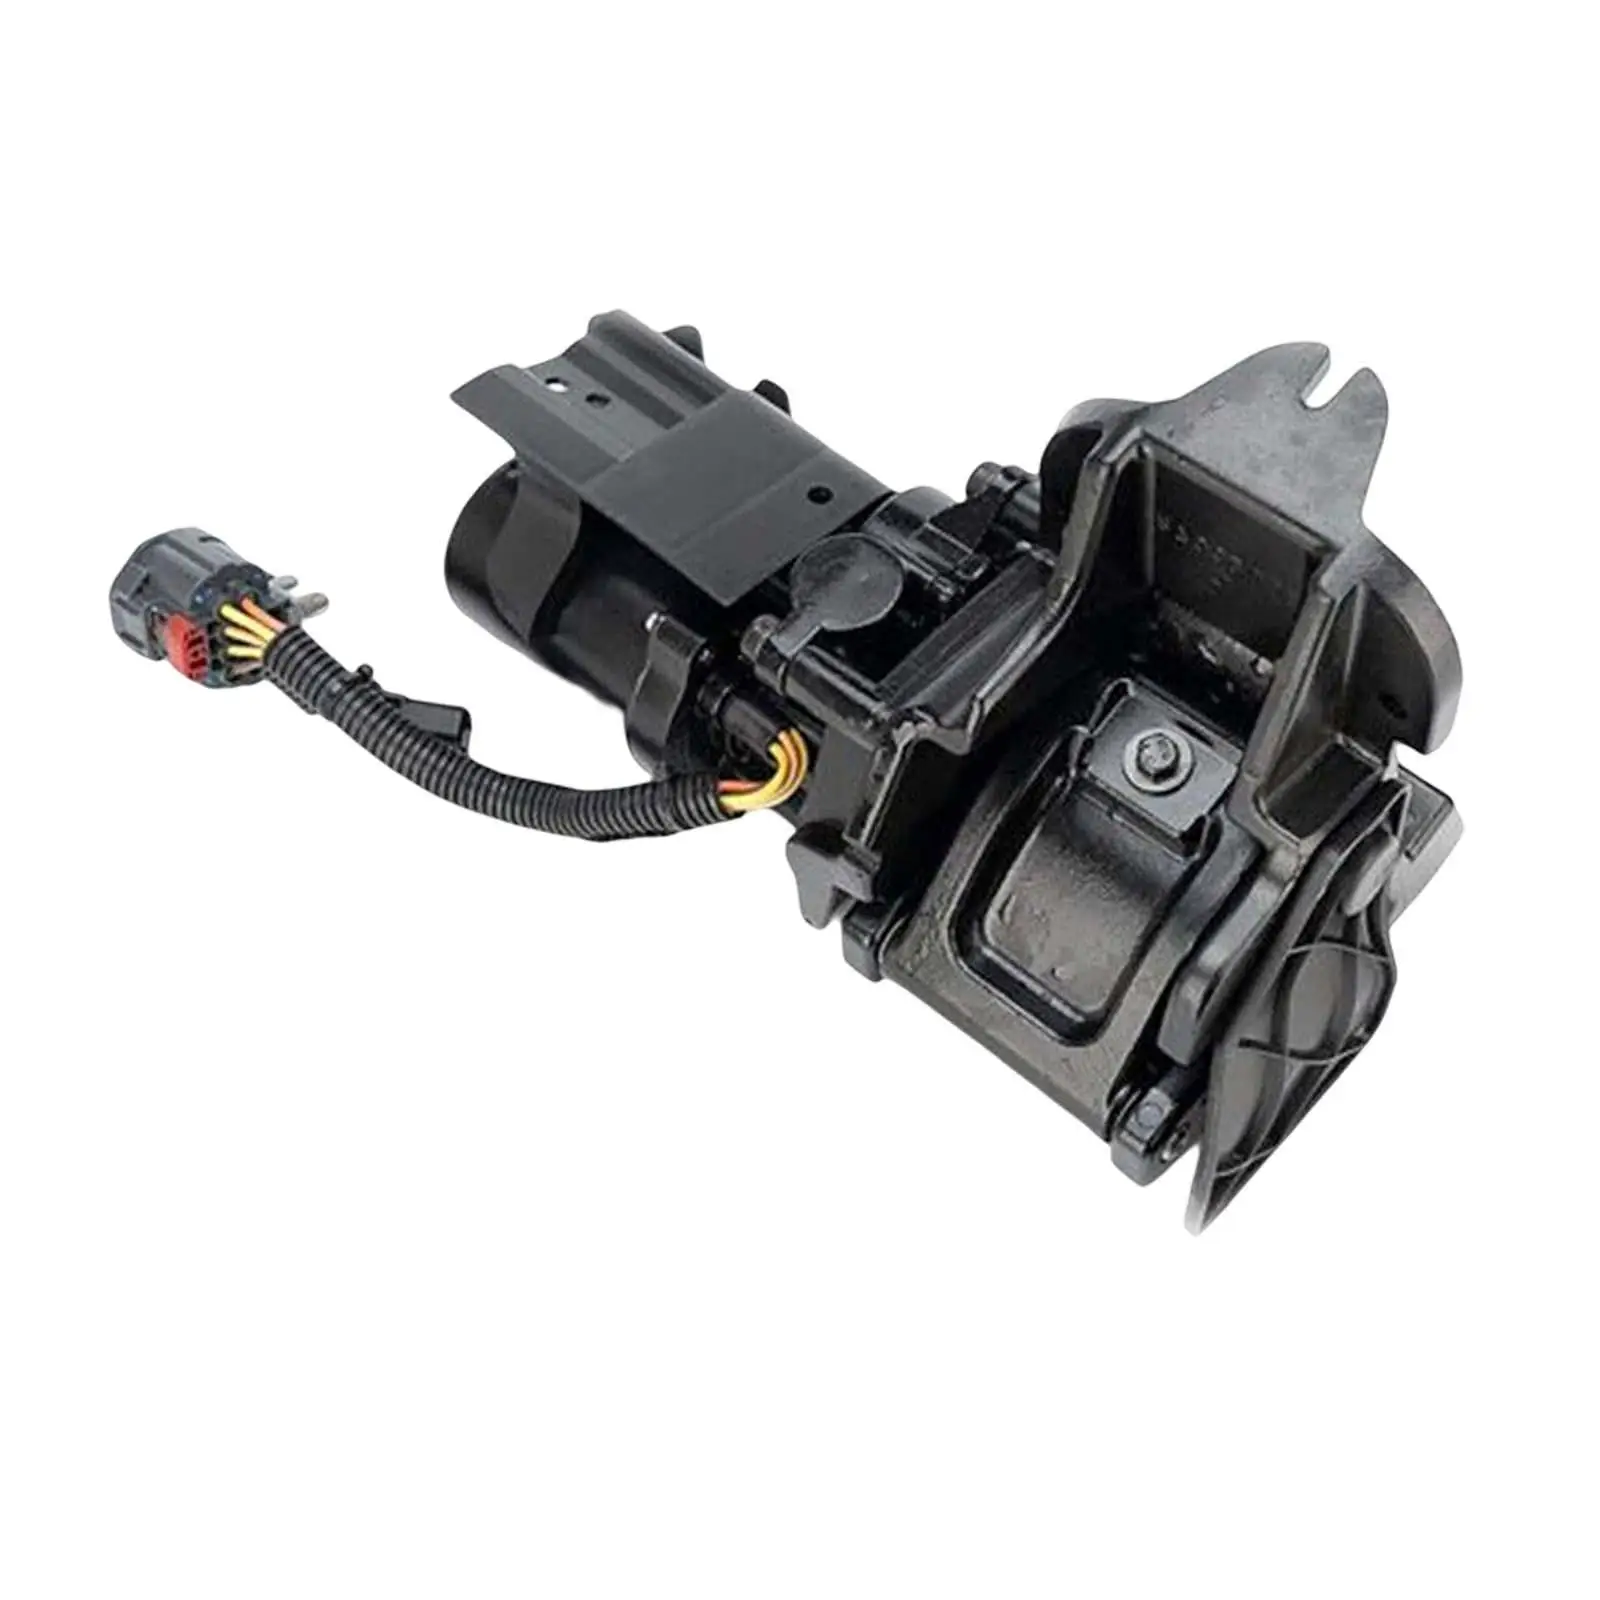 

84452642 84131859 23433888 22935835 Replaces Accessories Driver Side Assist Step Motor for GMC Yukon XL 2015-2020 5.3L 6.2L